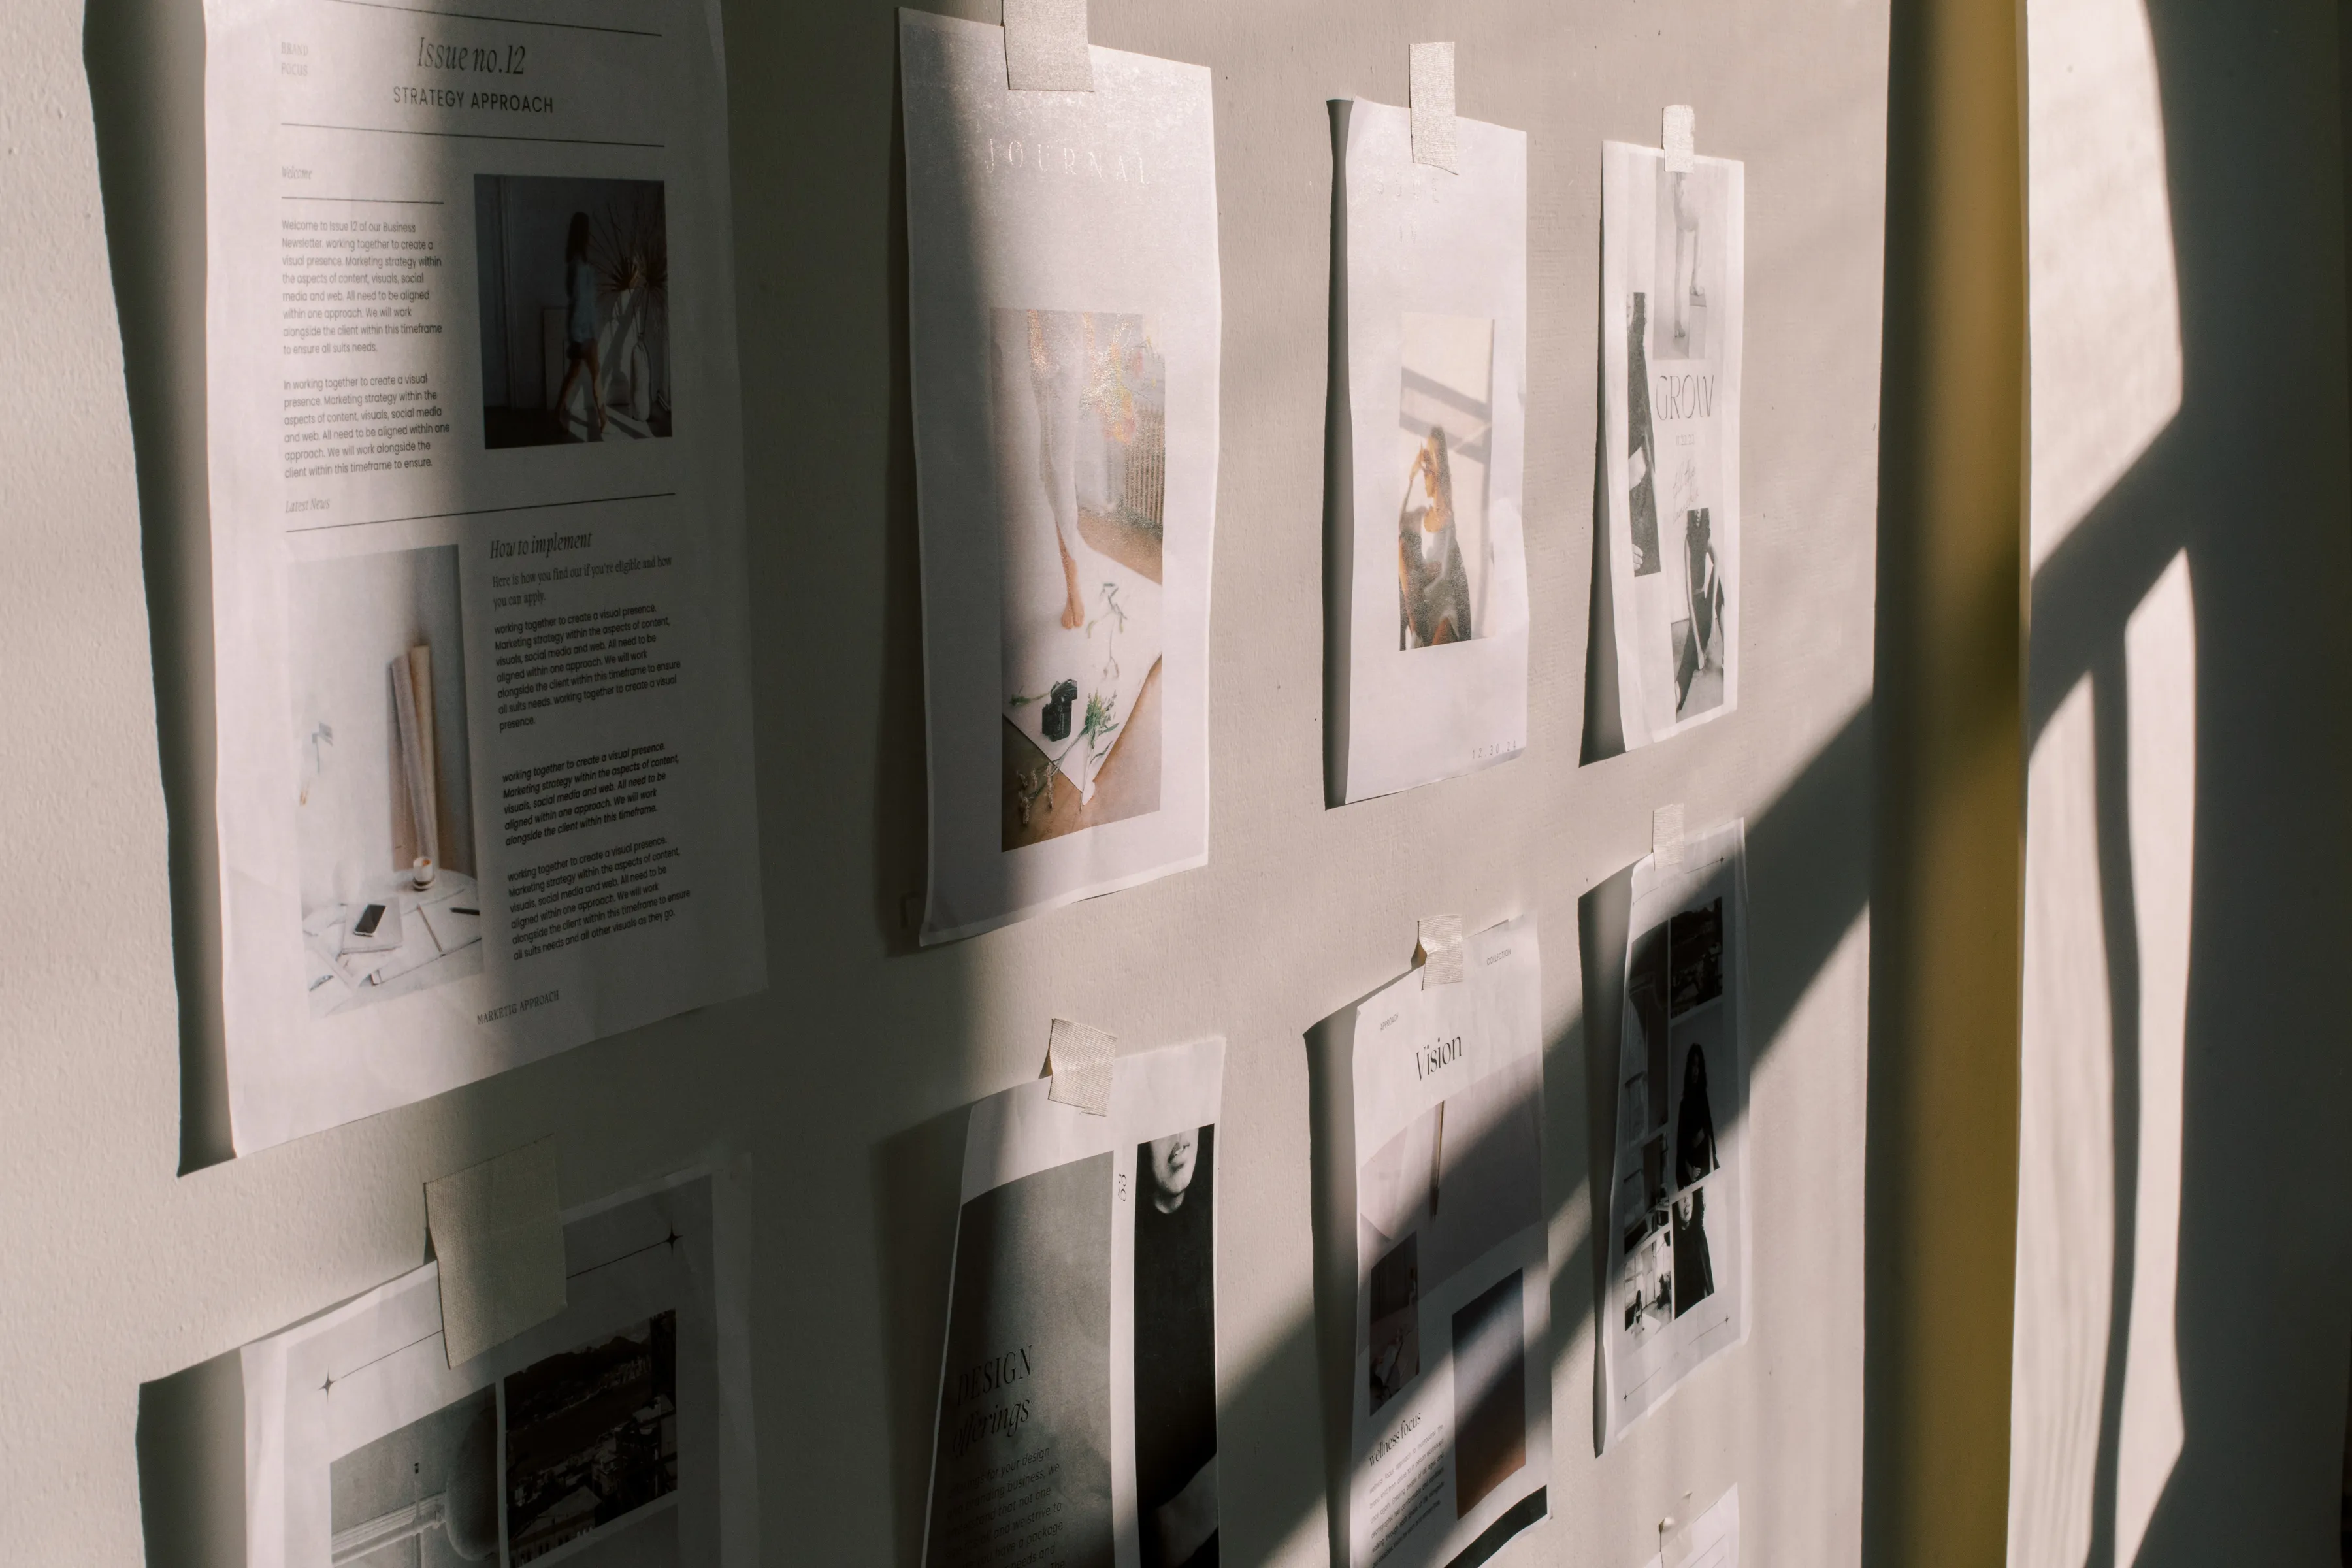 Papers pinned to a wall. There are shadows playing against the papers and it looks quite moody. There are words on the papers like strategic approach, vision and design